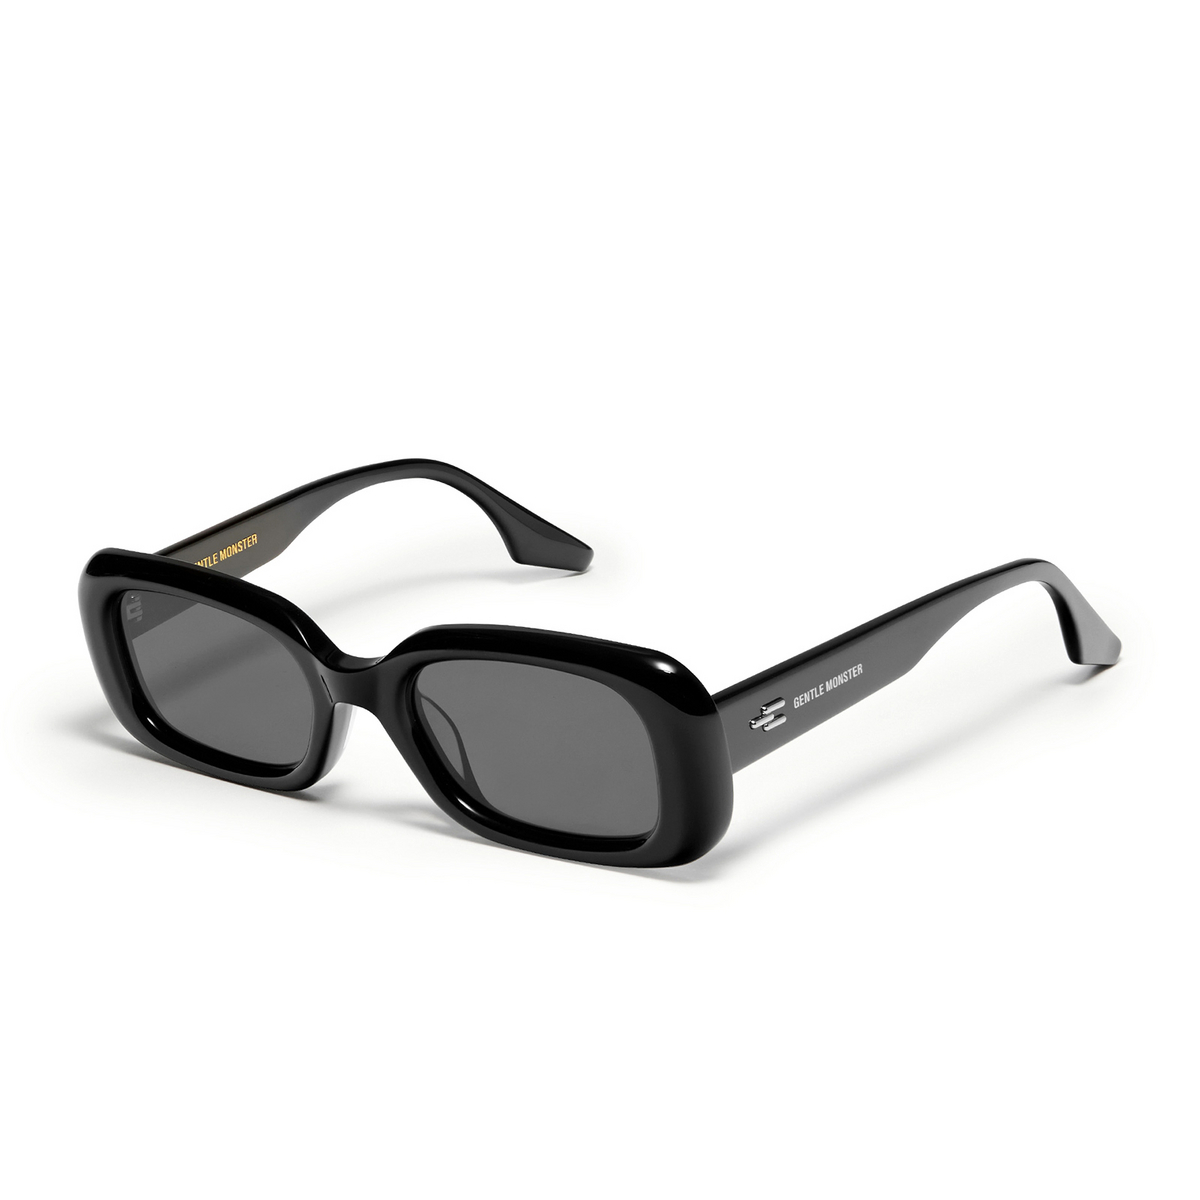 Gentle Monster® Rectangle Sunglasses: Bliss color Black 01 - three-quarters view.